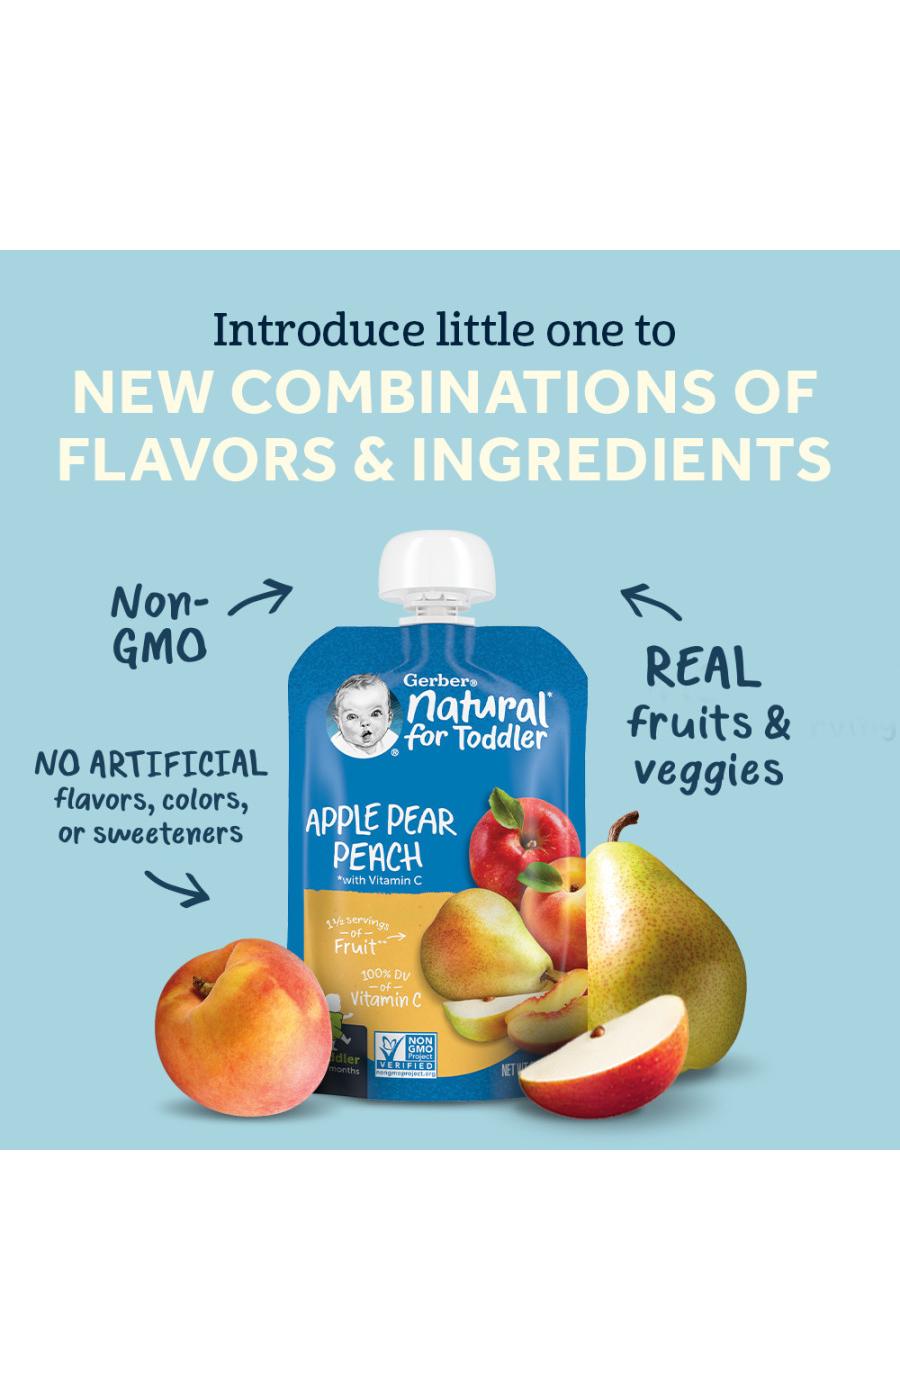 Gerber Natural for Toddler Food Pouch - Apple Pear & Peach; image 7 of 8